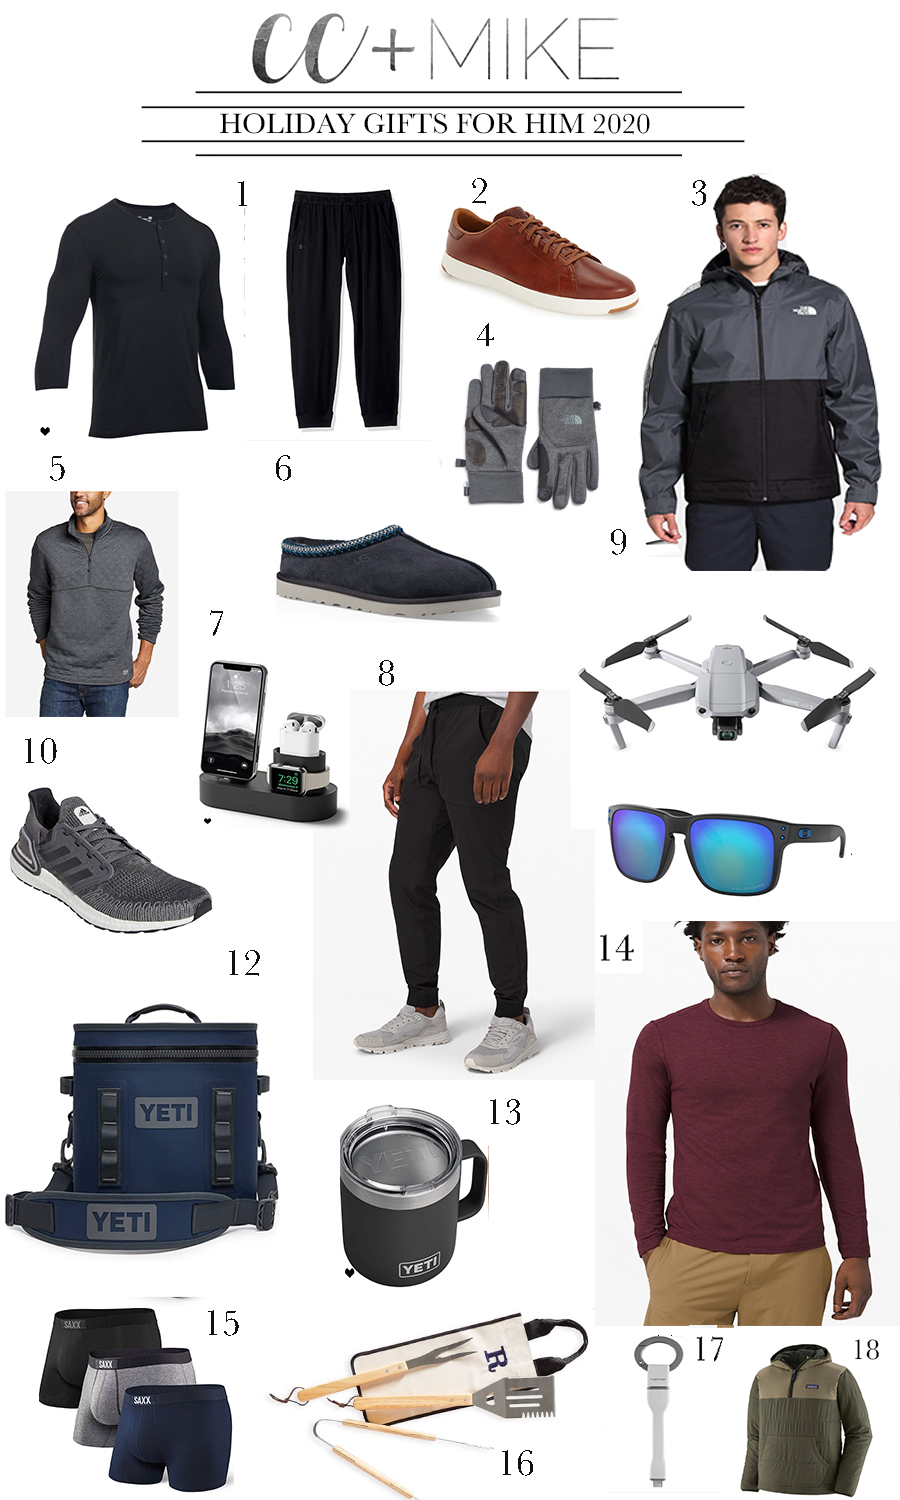 HOLIDAY-GIFTS-FOR-HIM-2020-BEST HOLIDAY GIFT GUIDES FOR MEN - CC & Mike